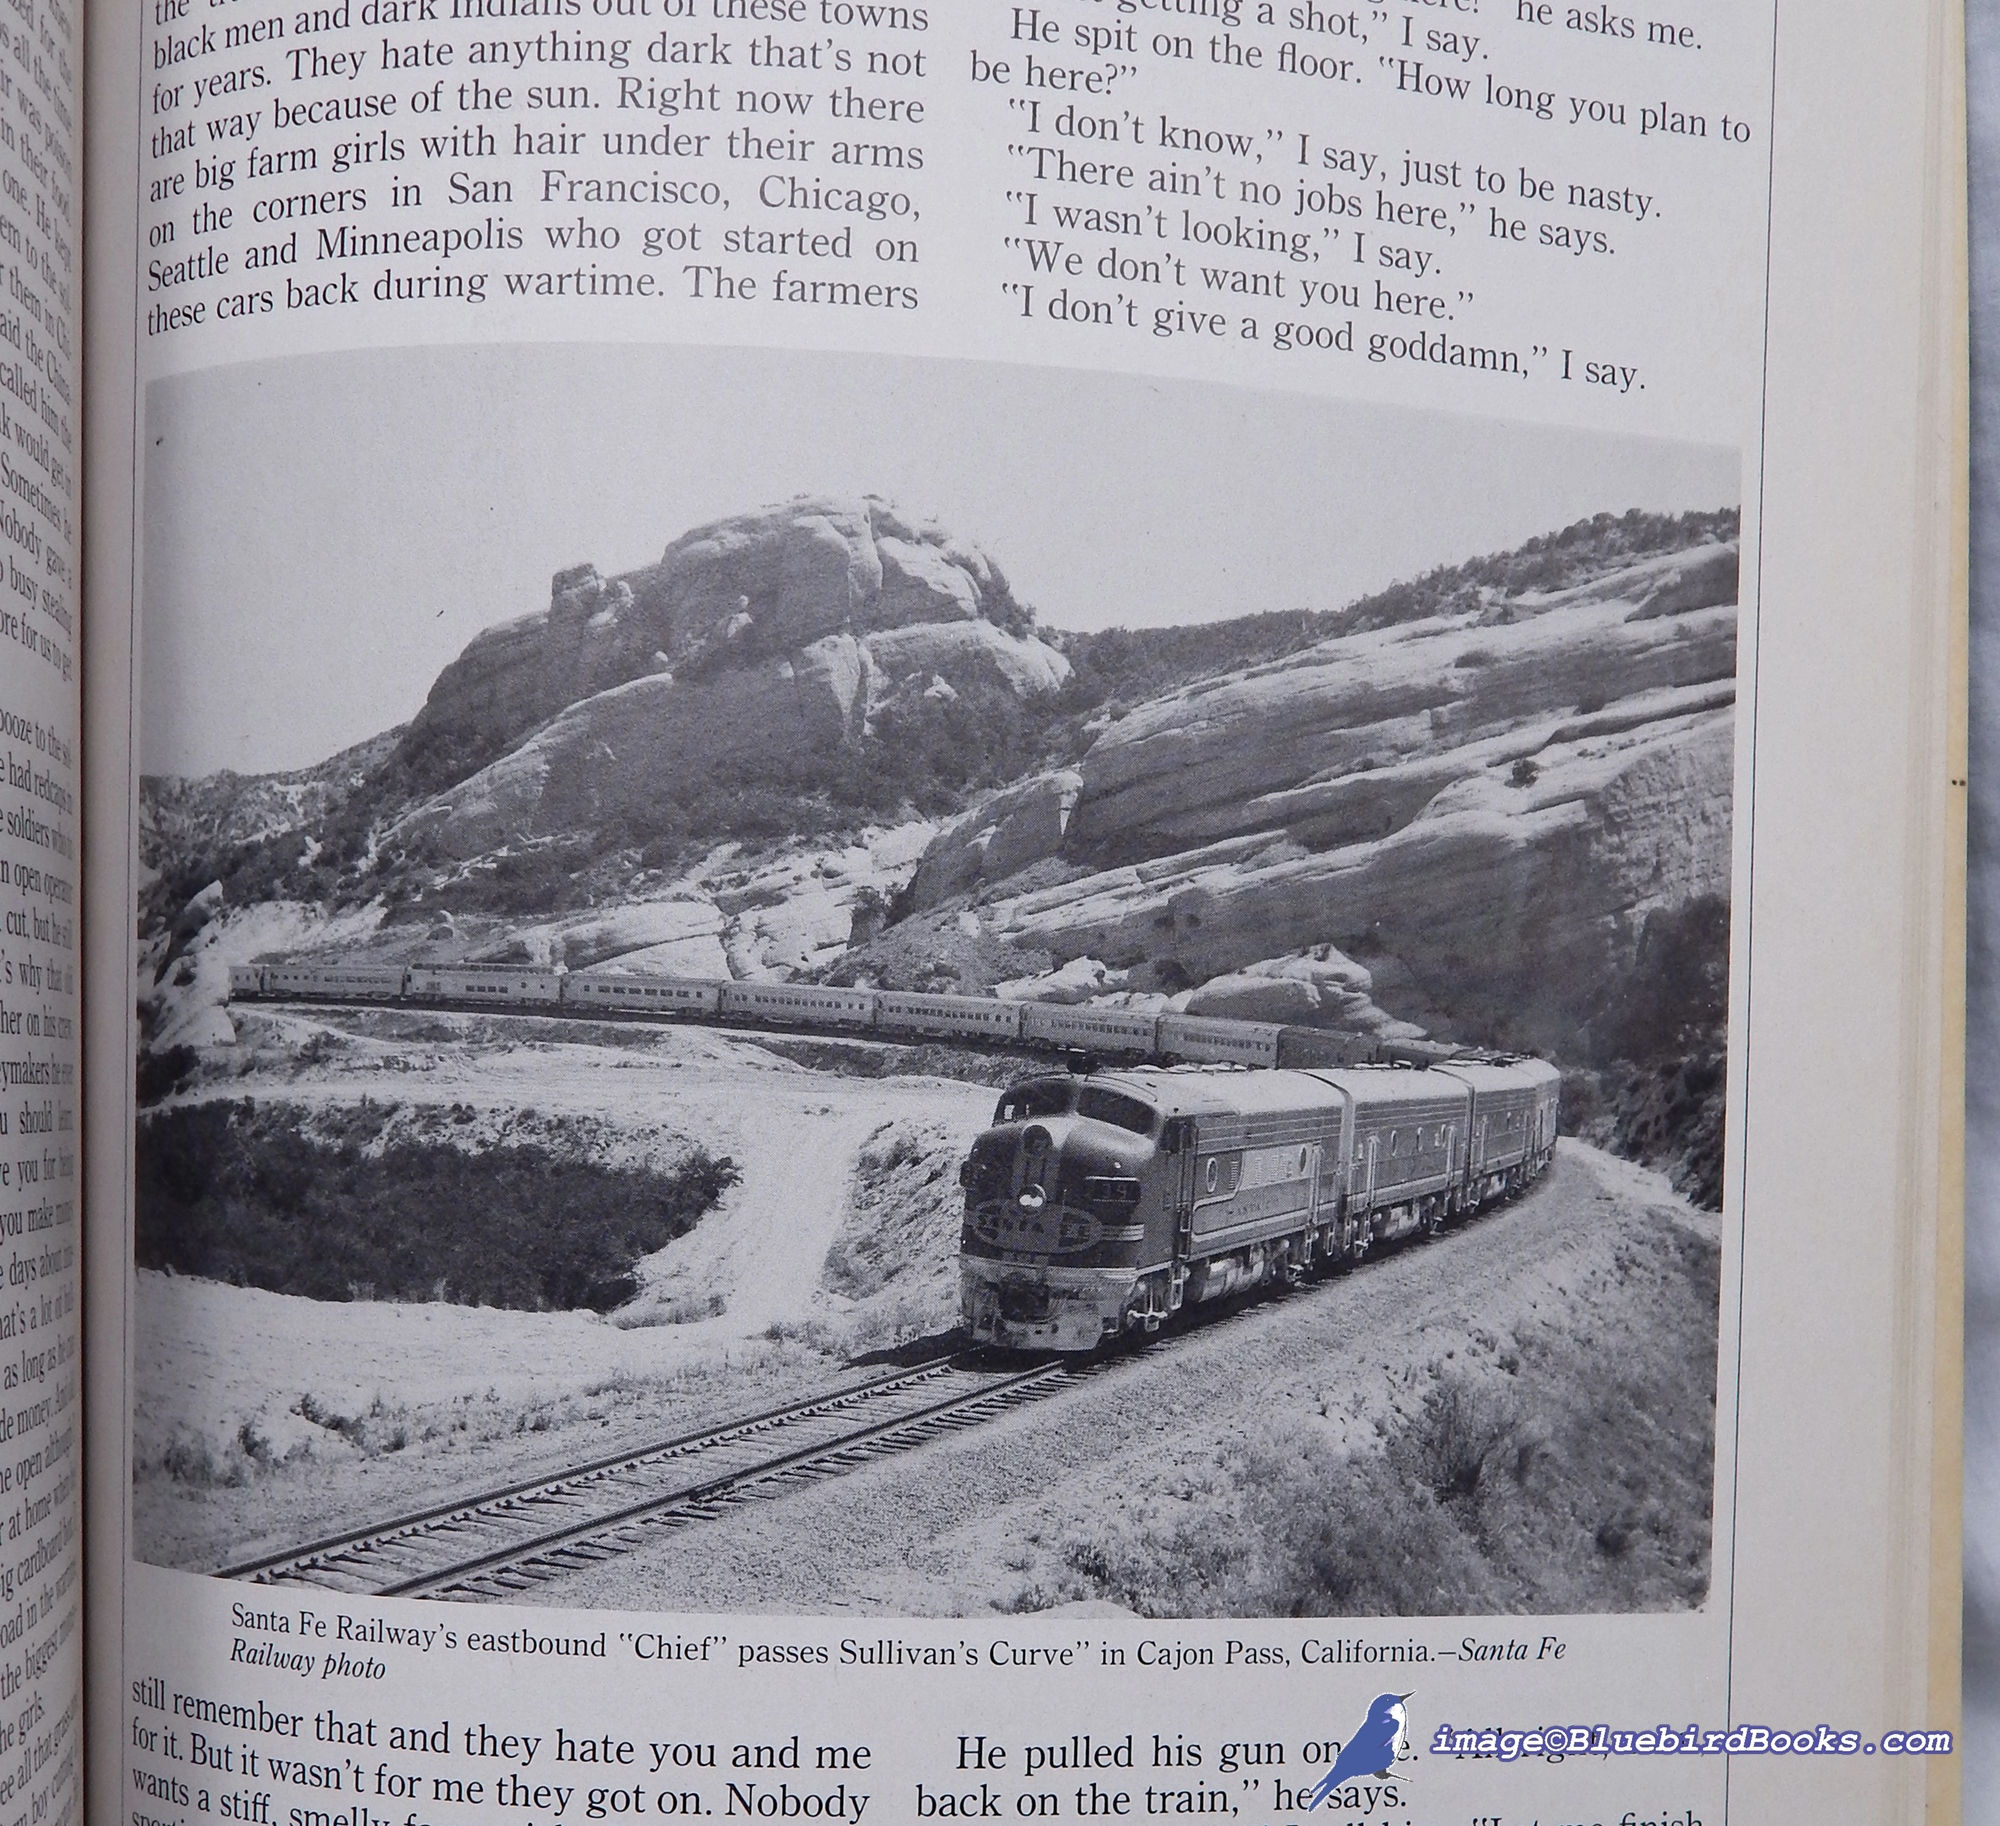 MCPHERSON, JAMES ALAN; WILLIAMS, MILLER (EDITORS) - Railroad: Trains and Train People in American Culture